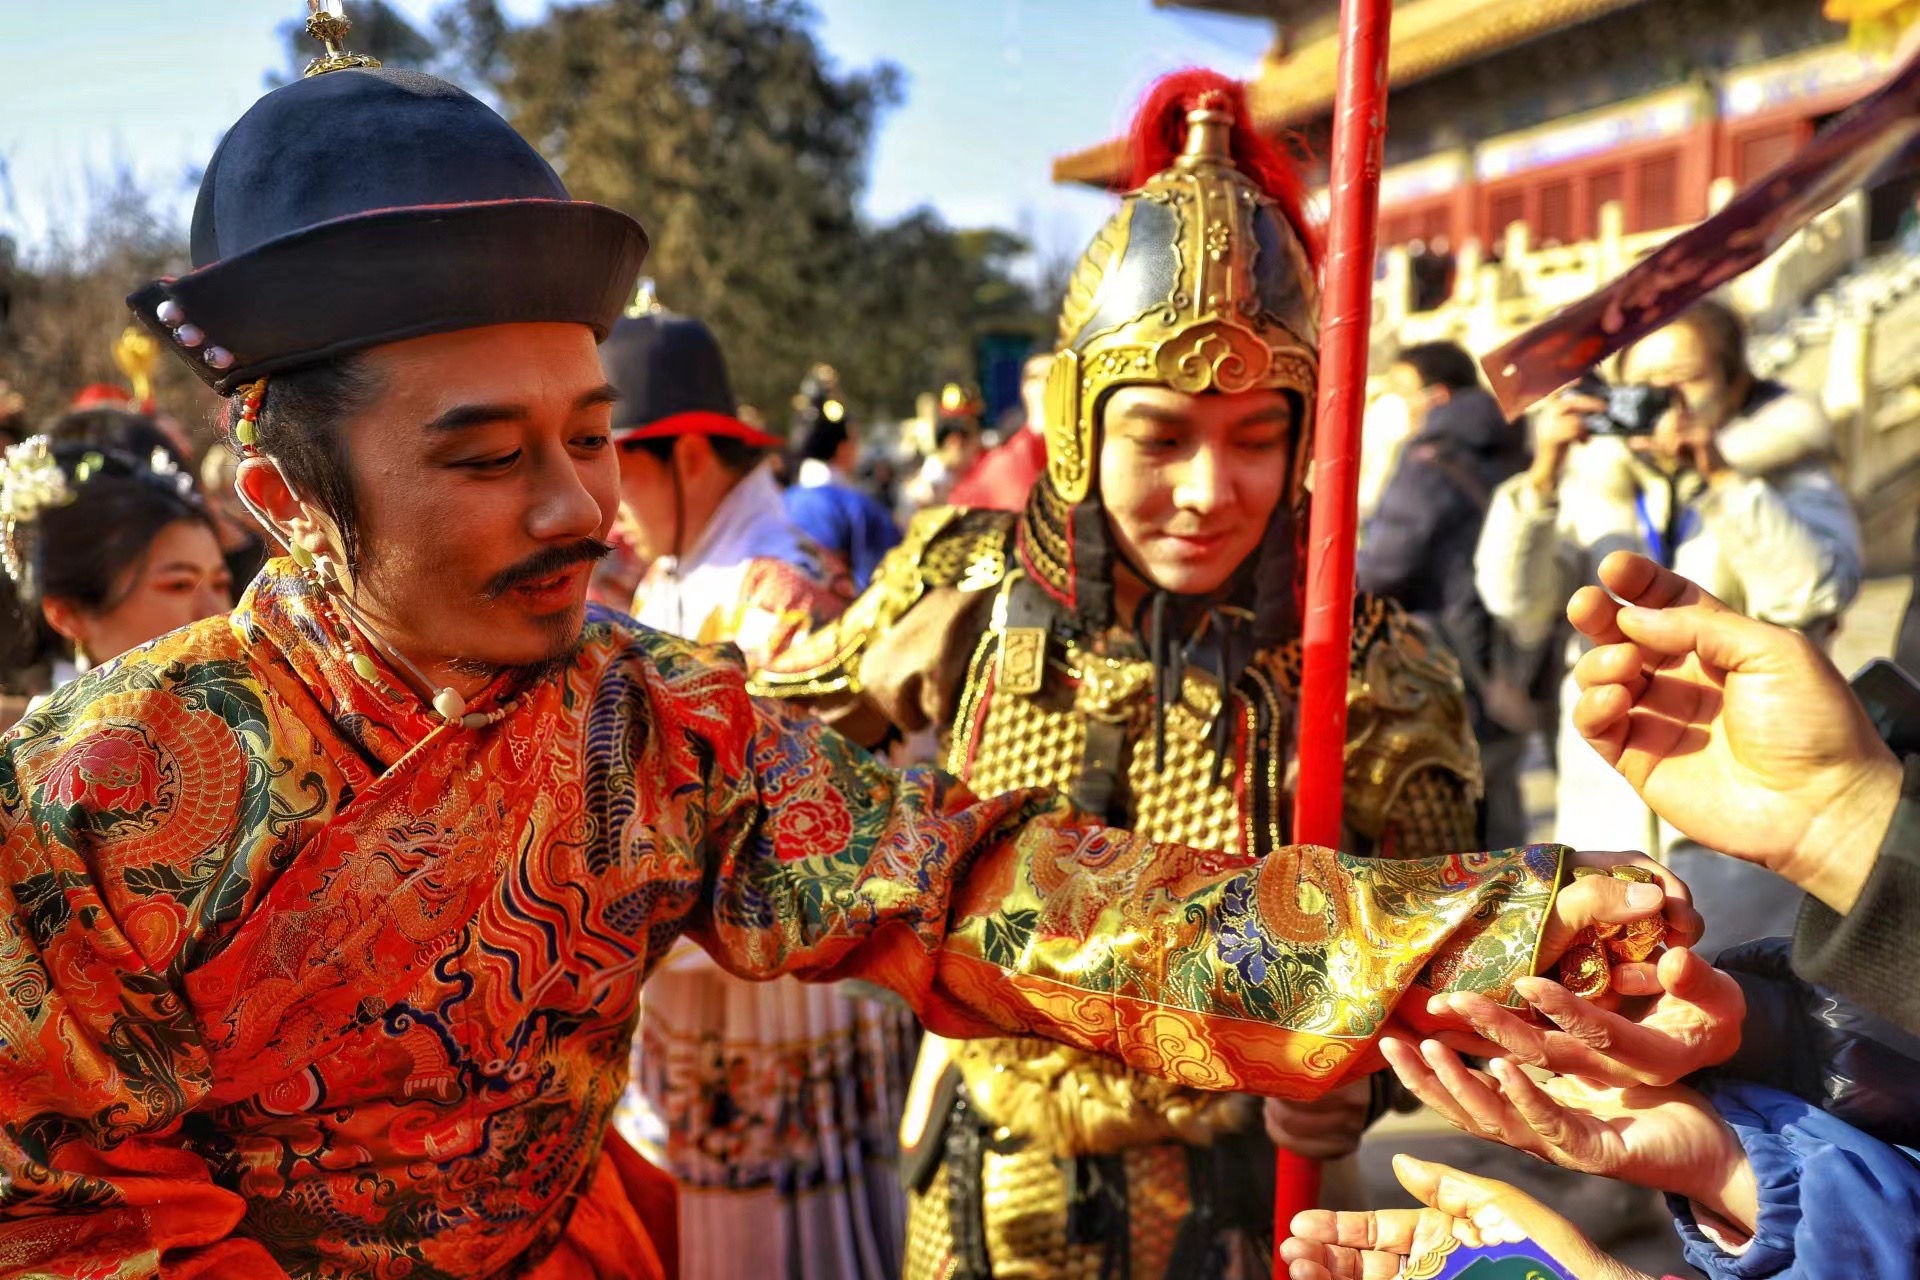 Performers of the Lantern Festival event at the Ming Tombs in Beijing on Sunday Photo: Li Hao/GT